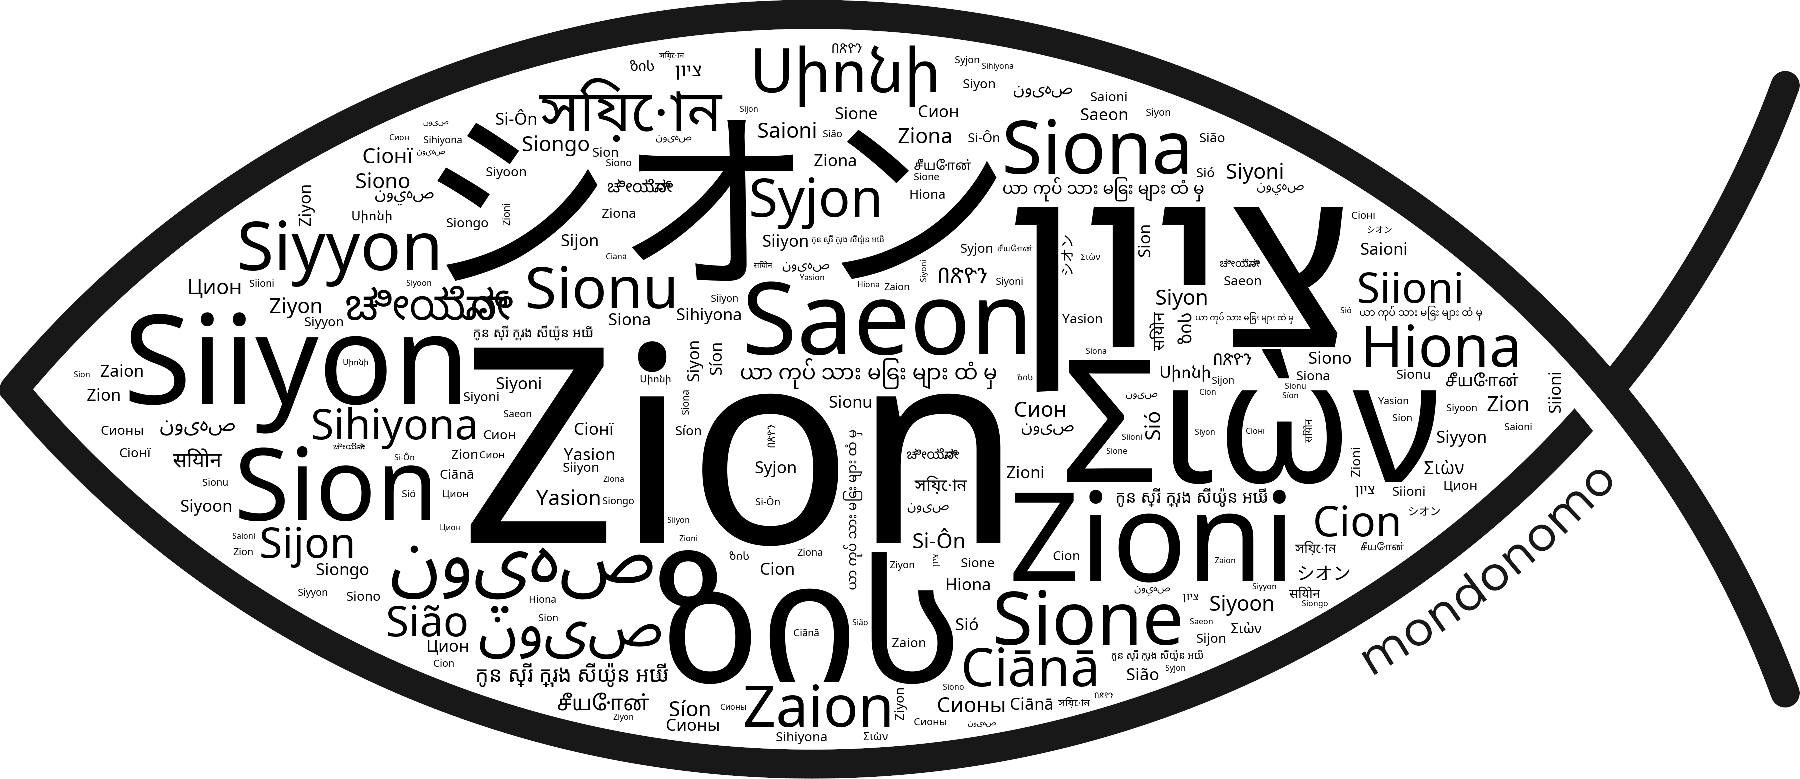 Name Zion in the world's Bibles